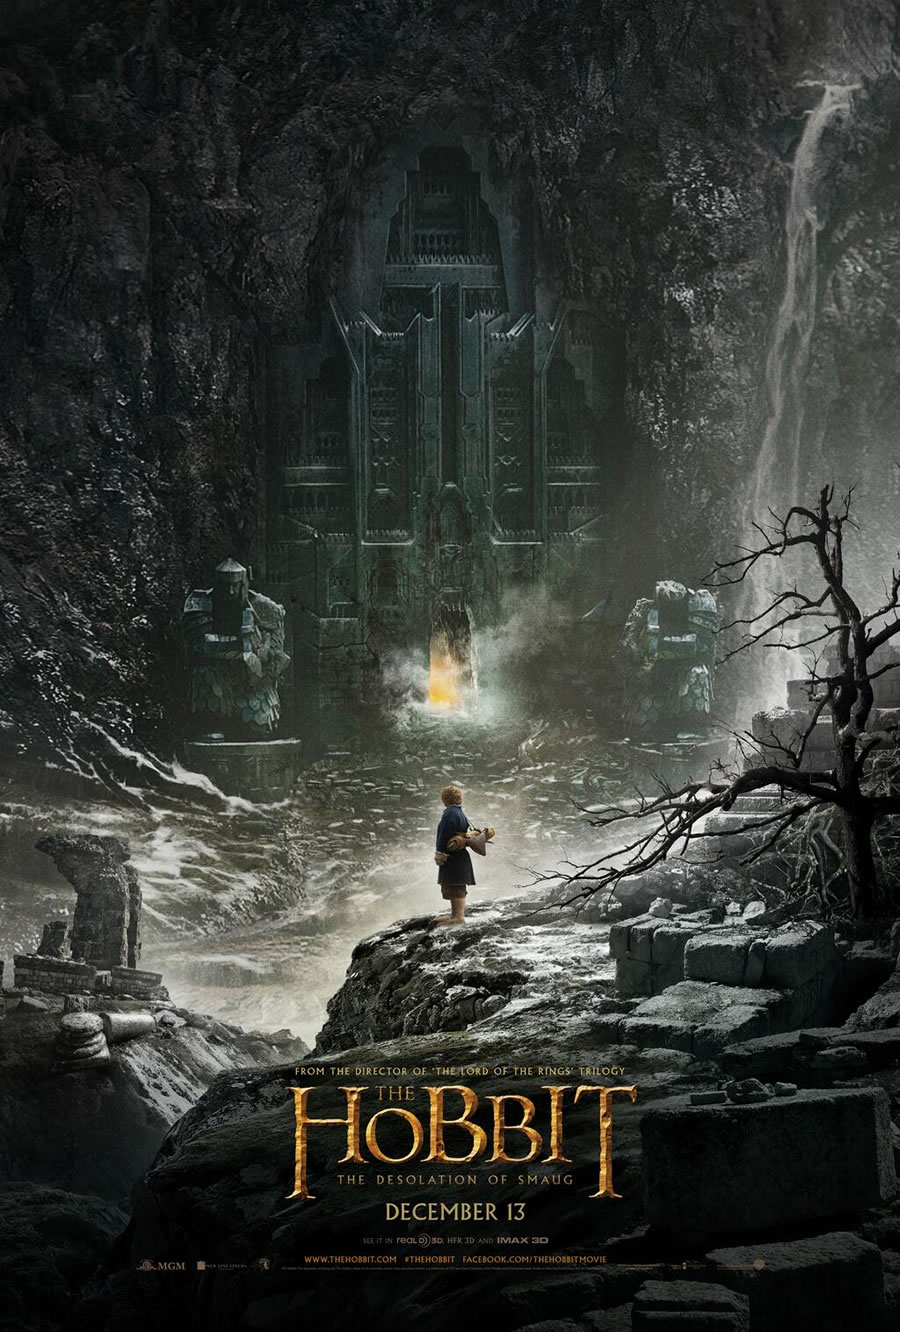 The Hobbit, The Desolation of Smaug Teaser Poster